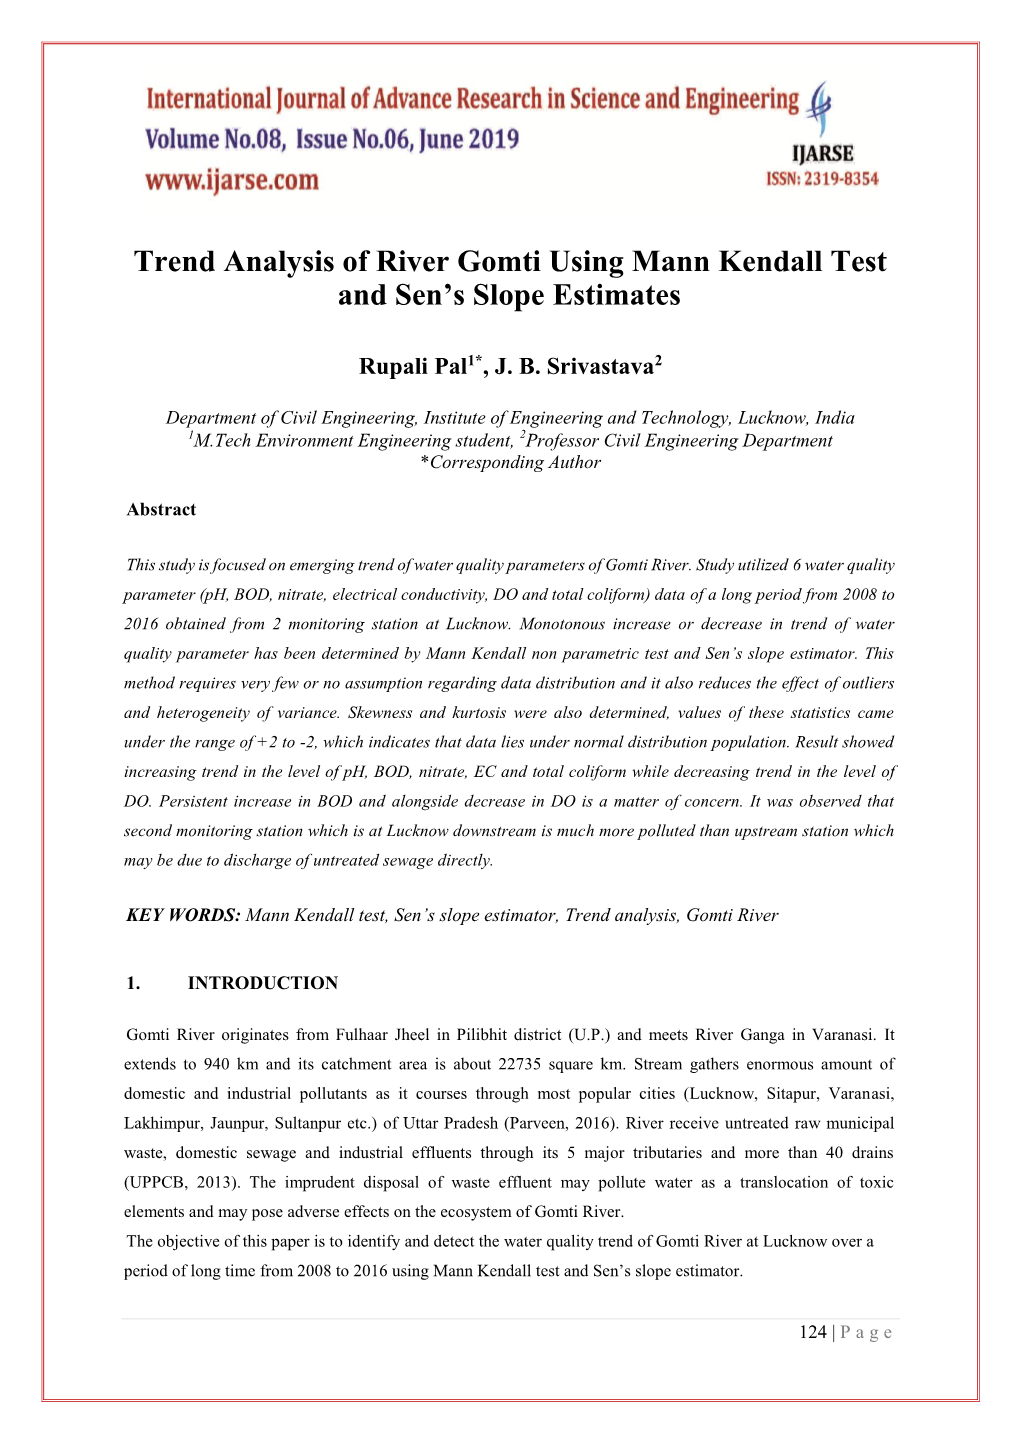 Trend Analysis of River Gomti Using Mann Kendall Test and Sen's Slope Estimates